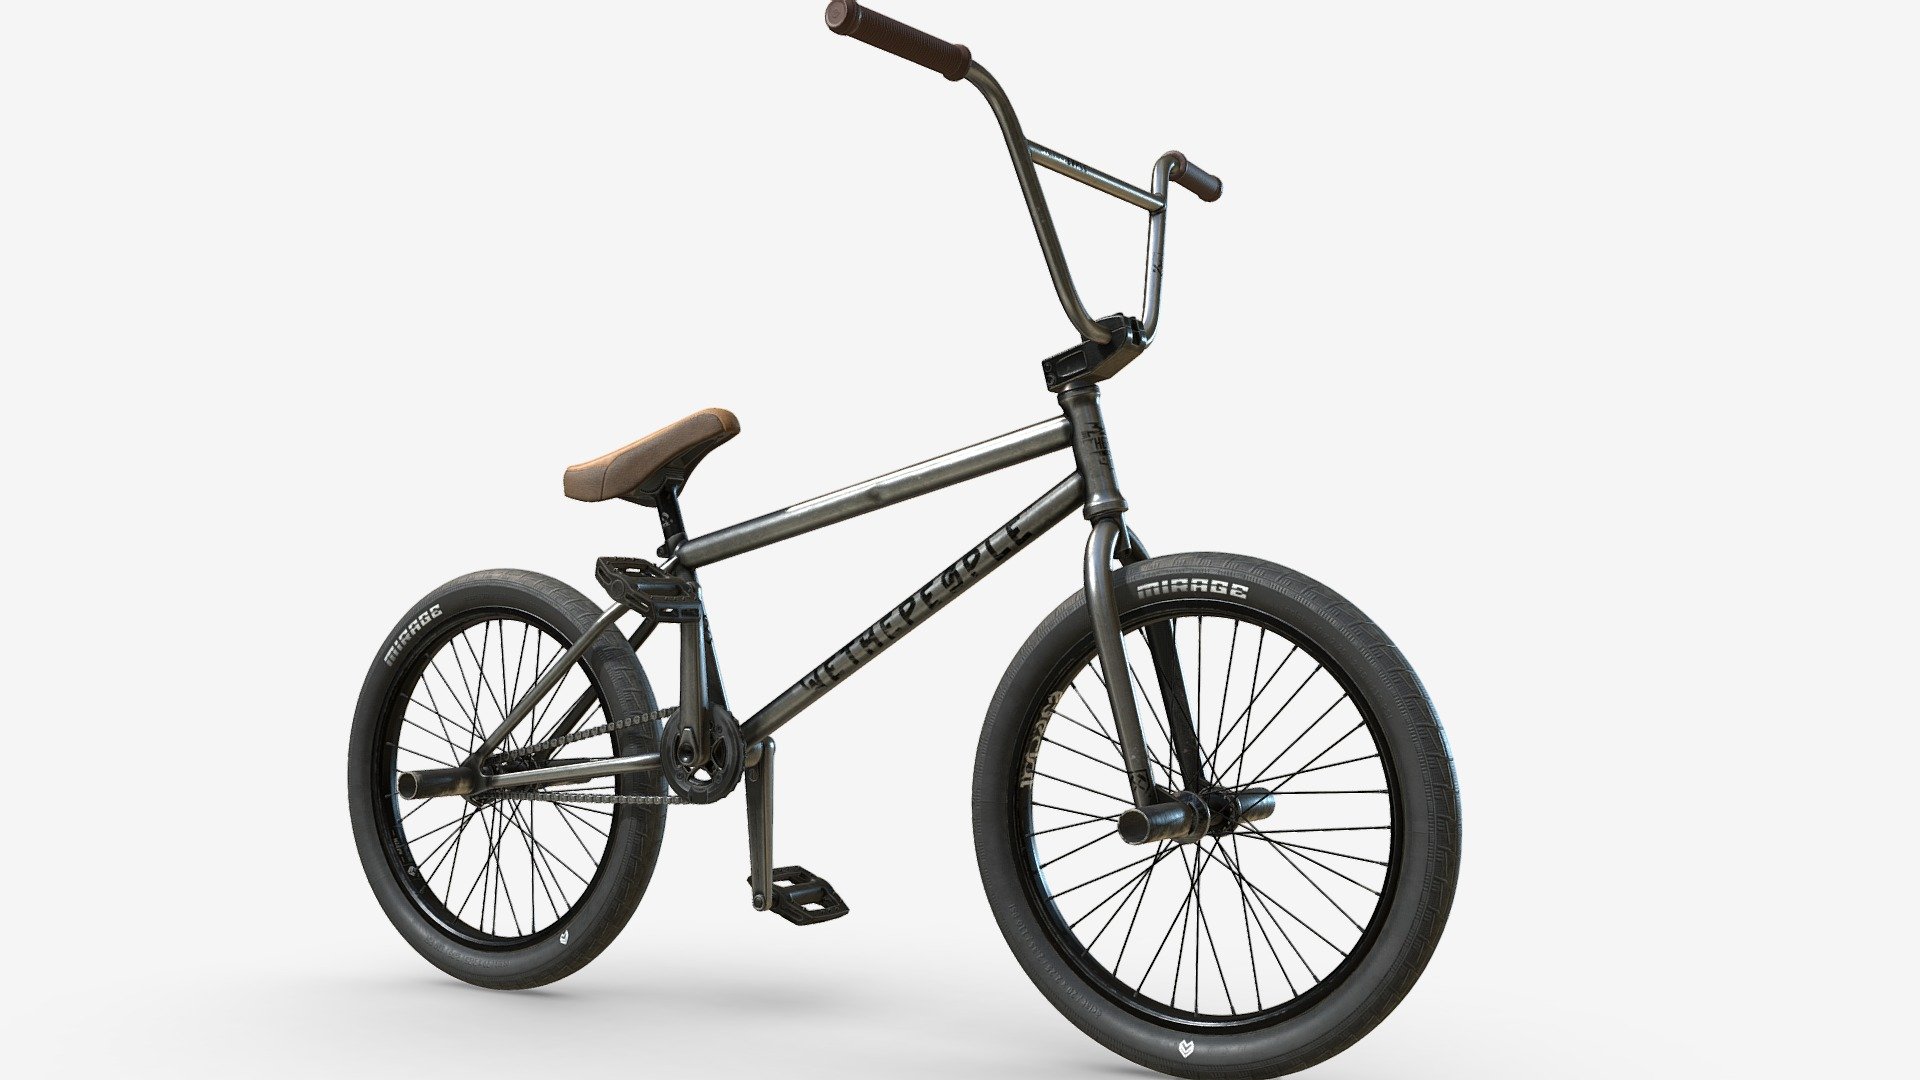 This is a street bmx made in Blender and Substance 3d model